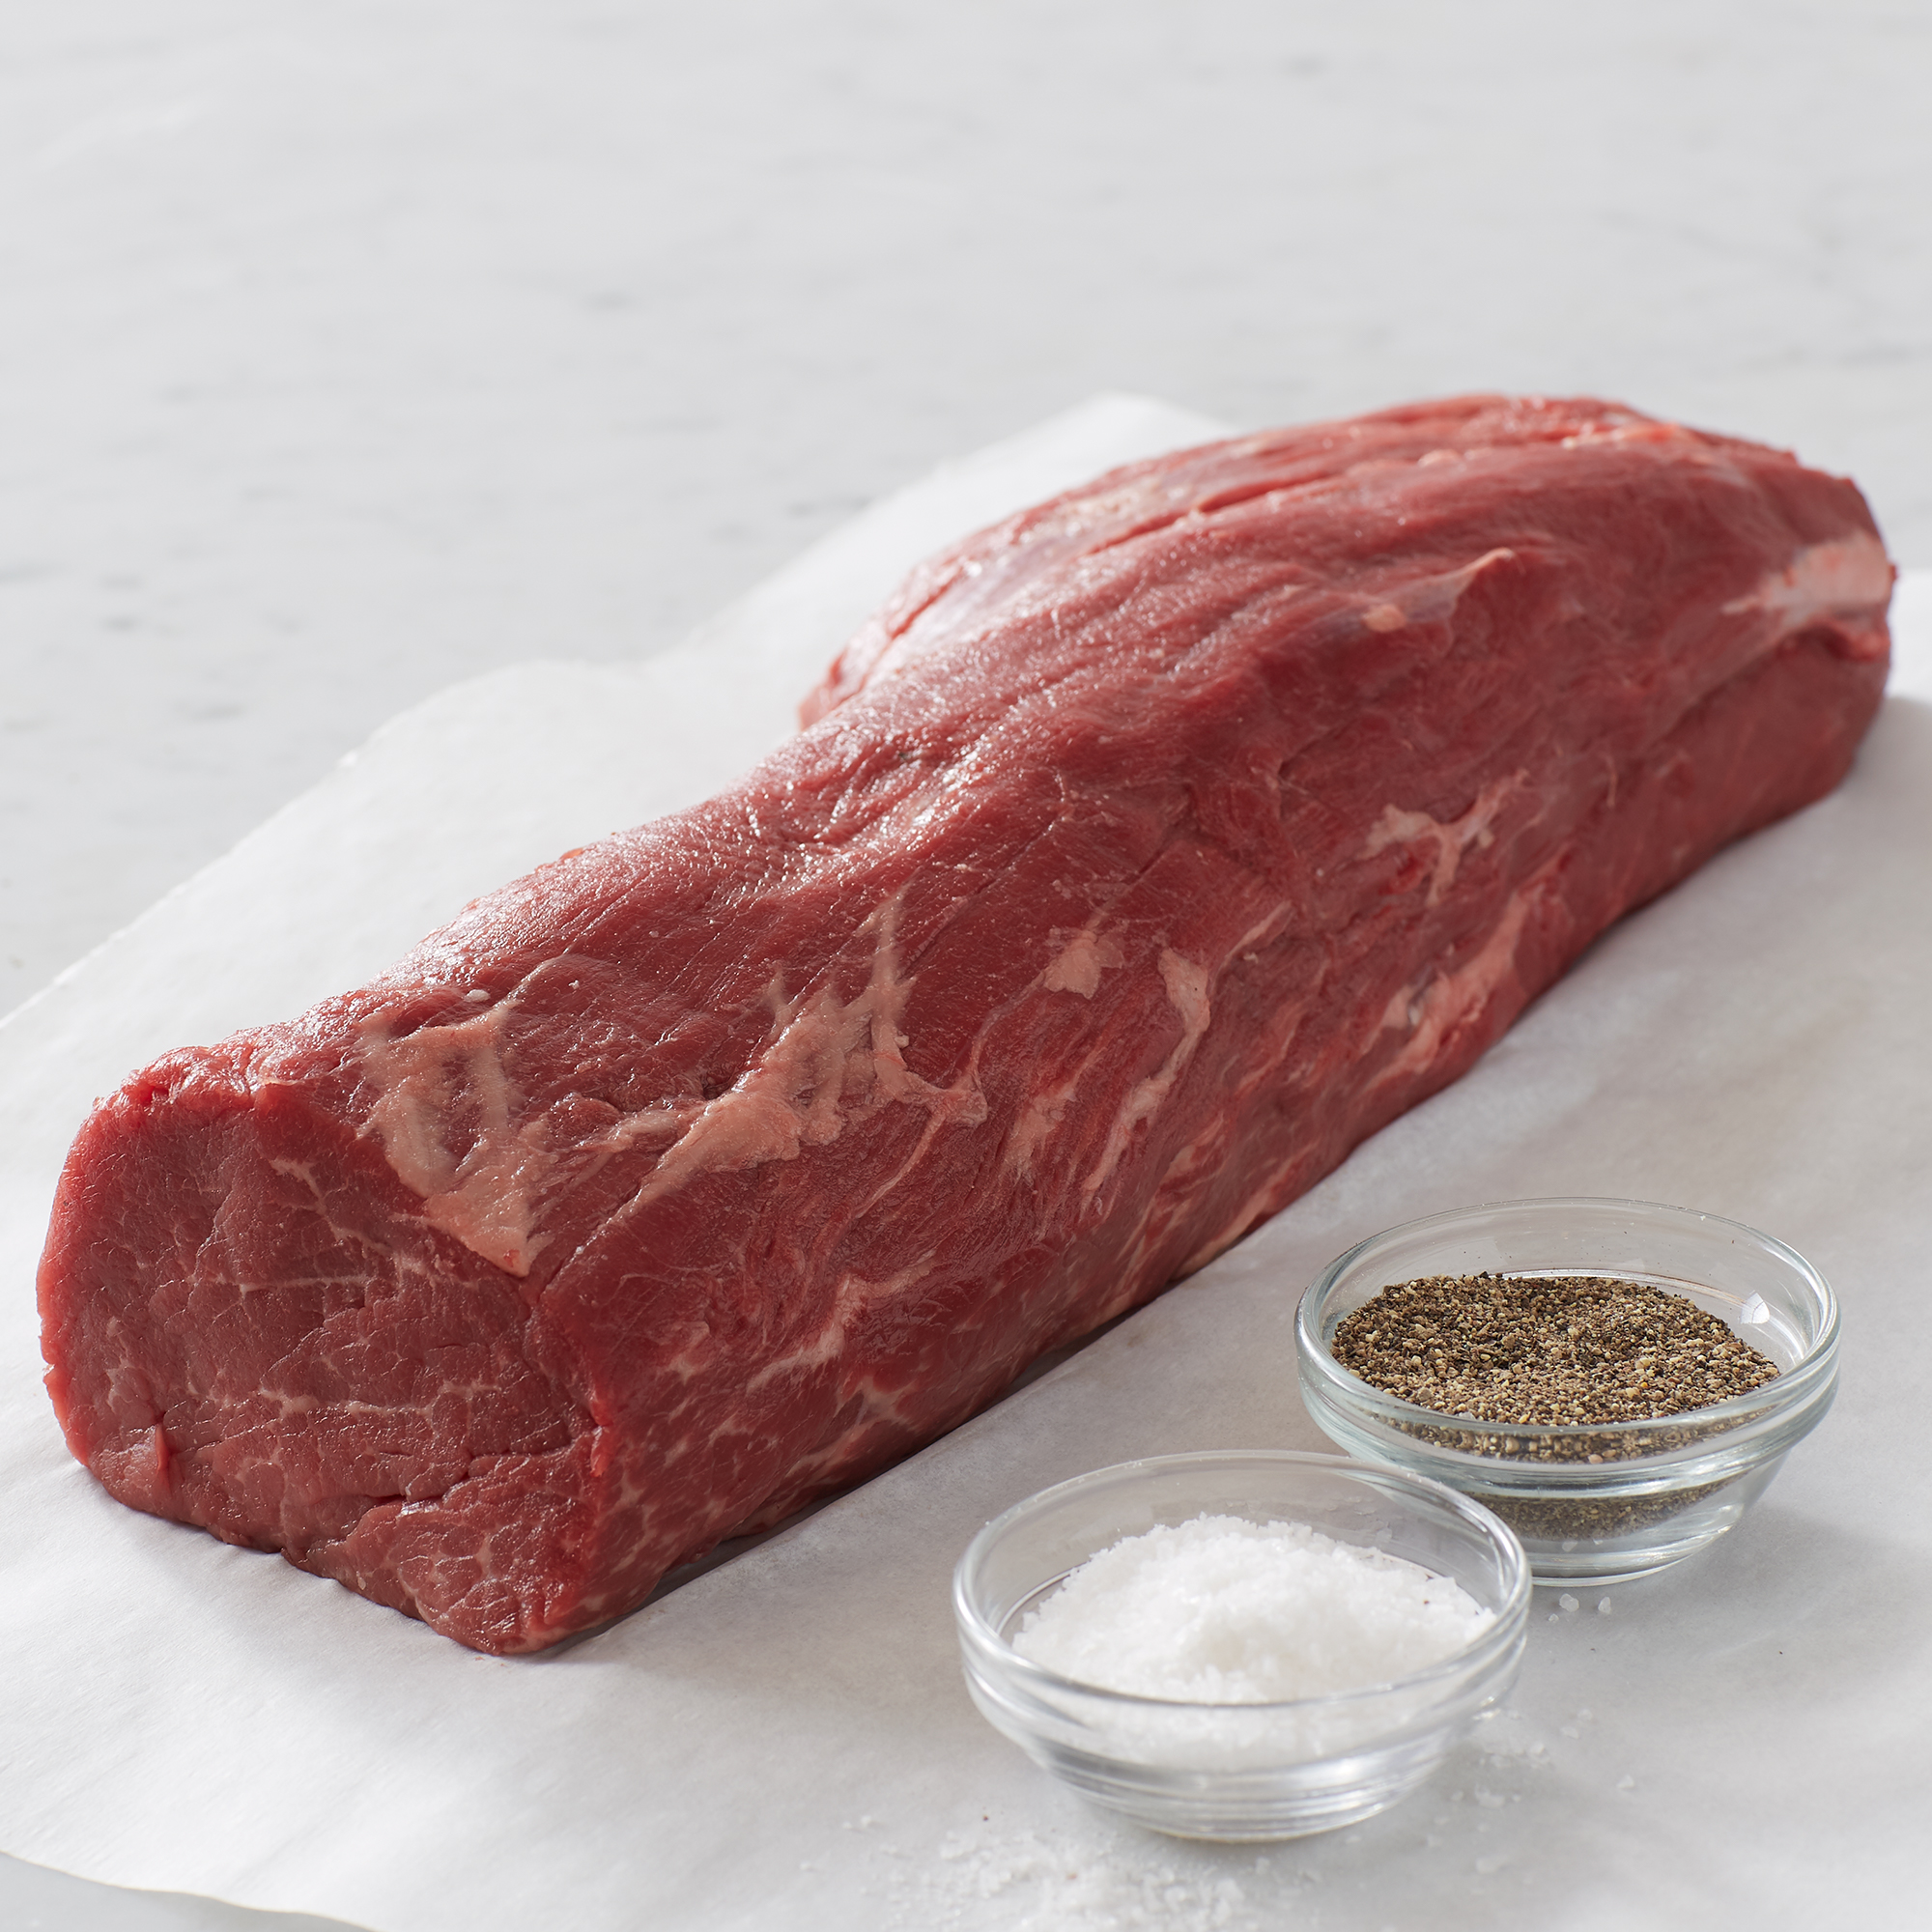 Beef tenderloin, which gets cut from the cow's loin, contains the file...